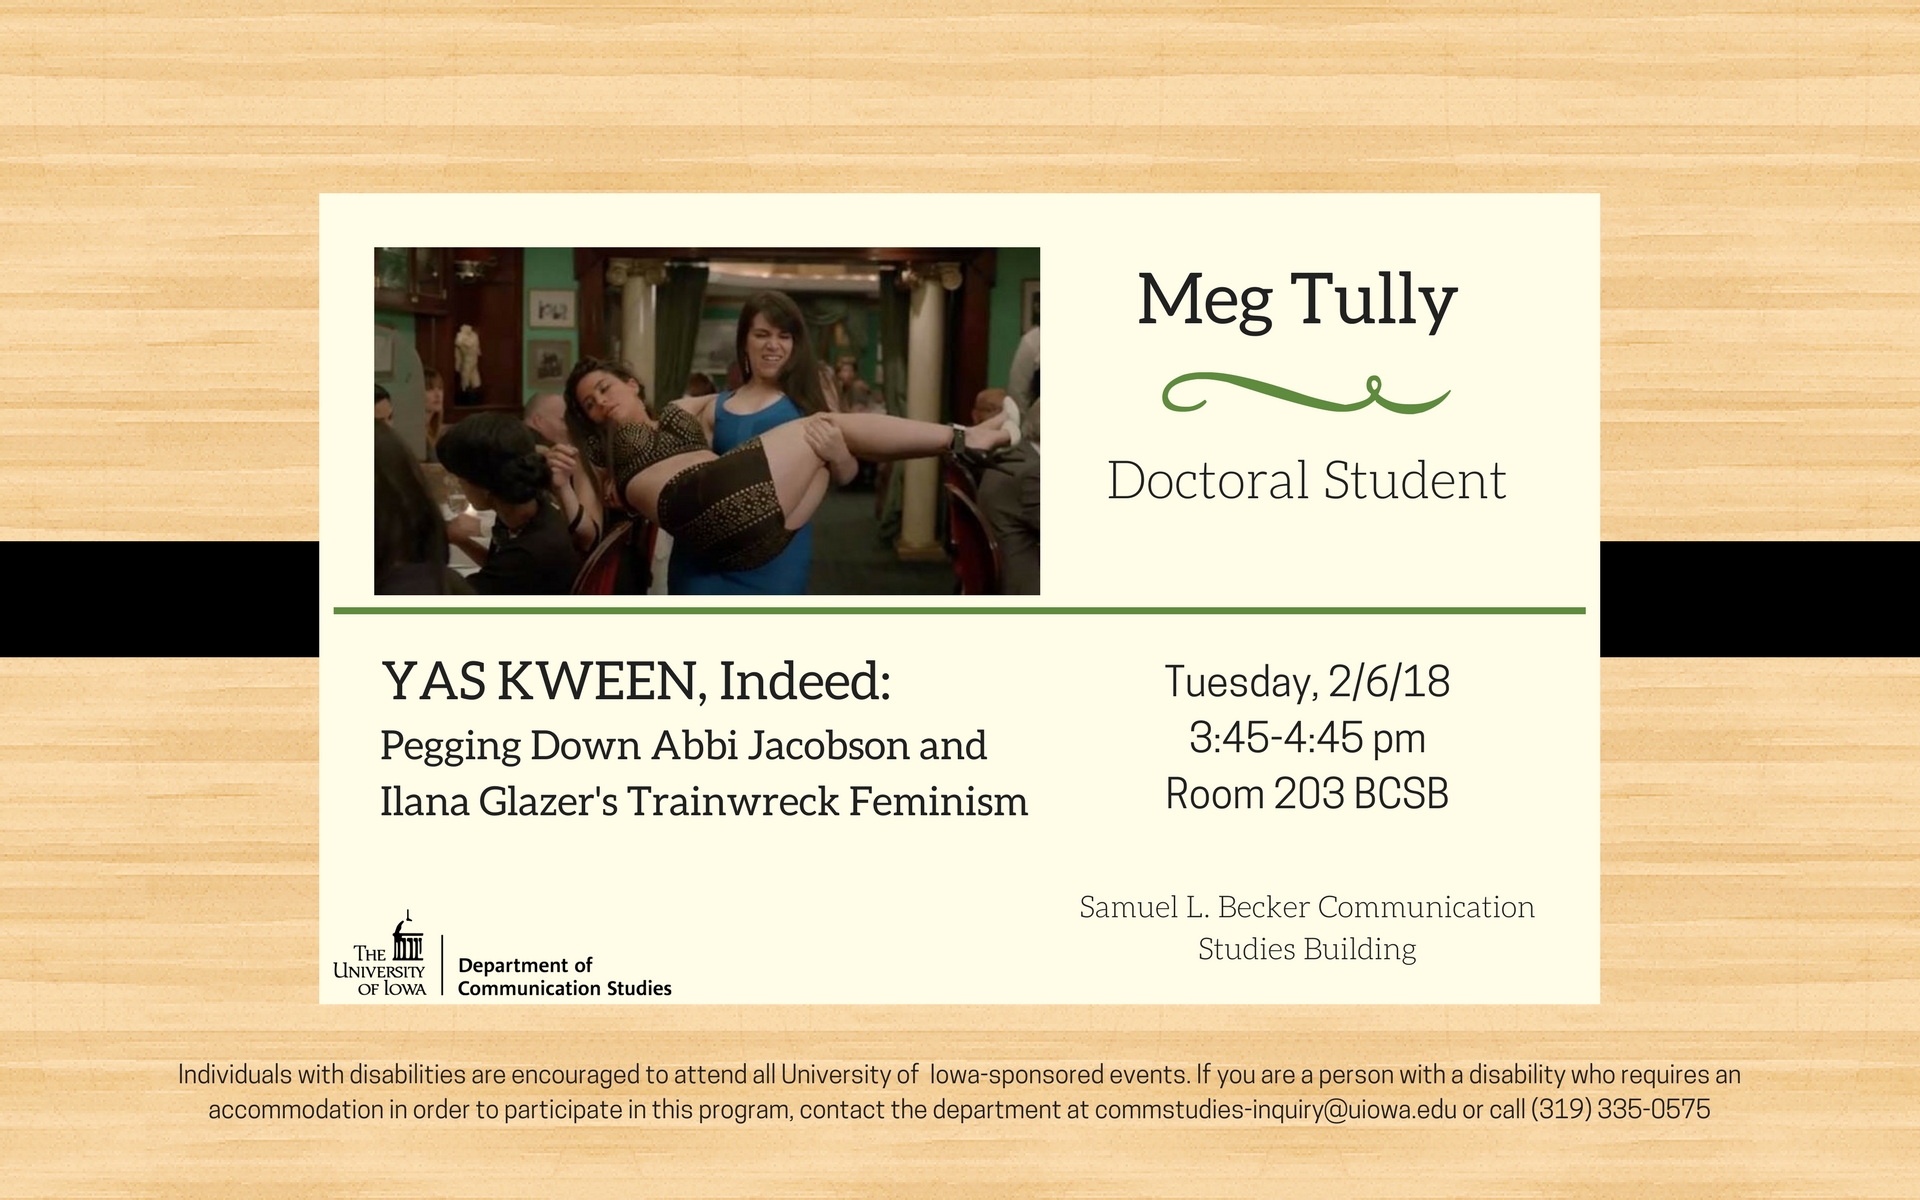 Meg Tully, doctoral student. Yas Kween, indeed: pegging down Abbi Jacobson and Ilana Glazer's Trainwreck Feminism